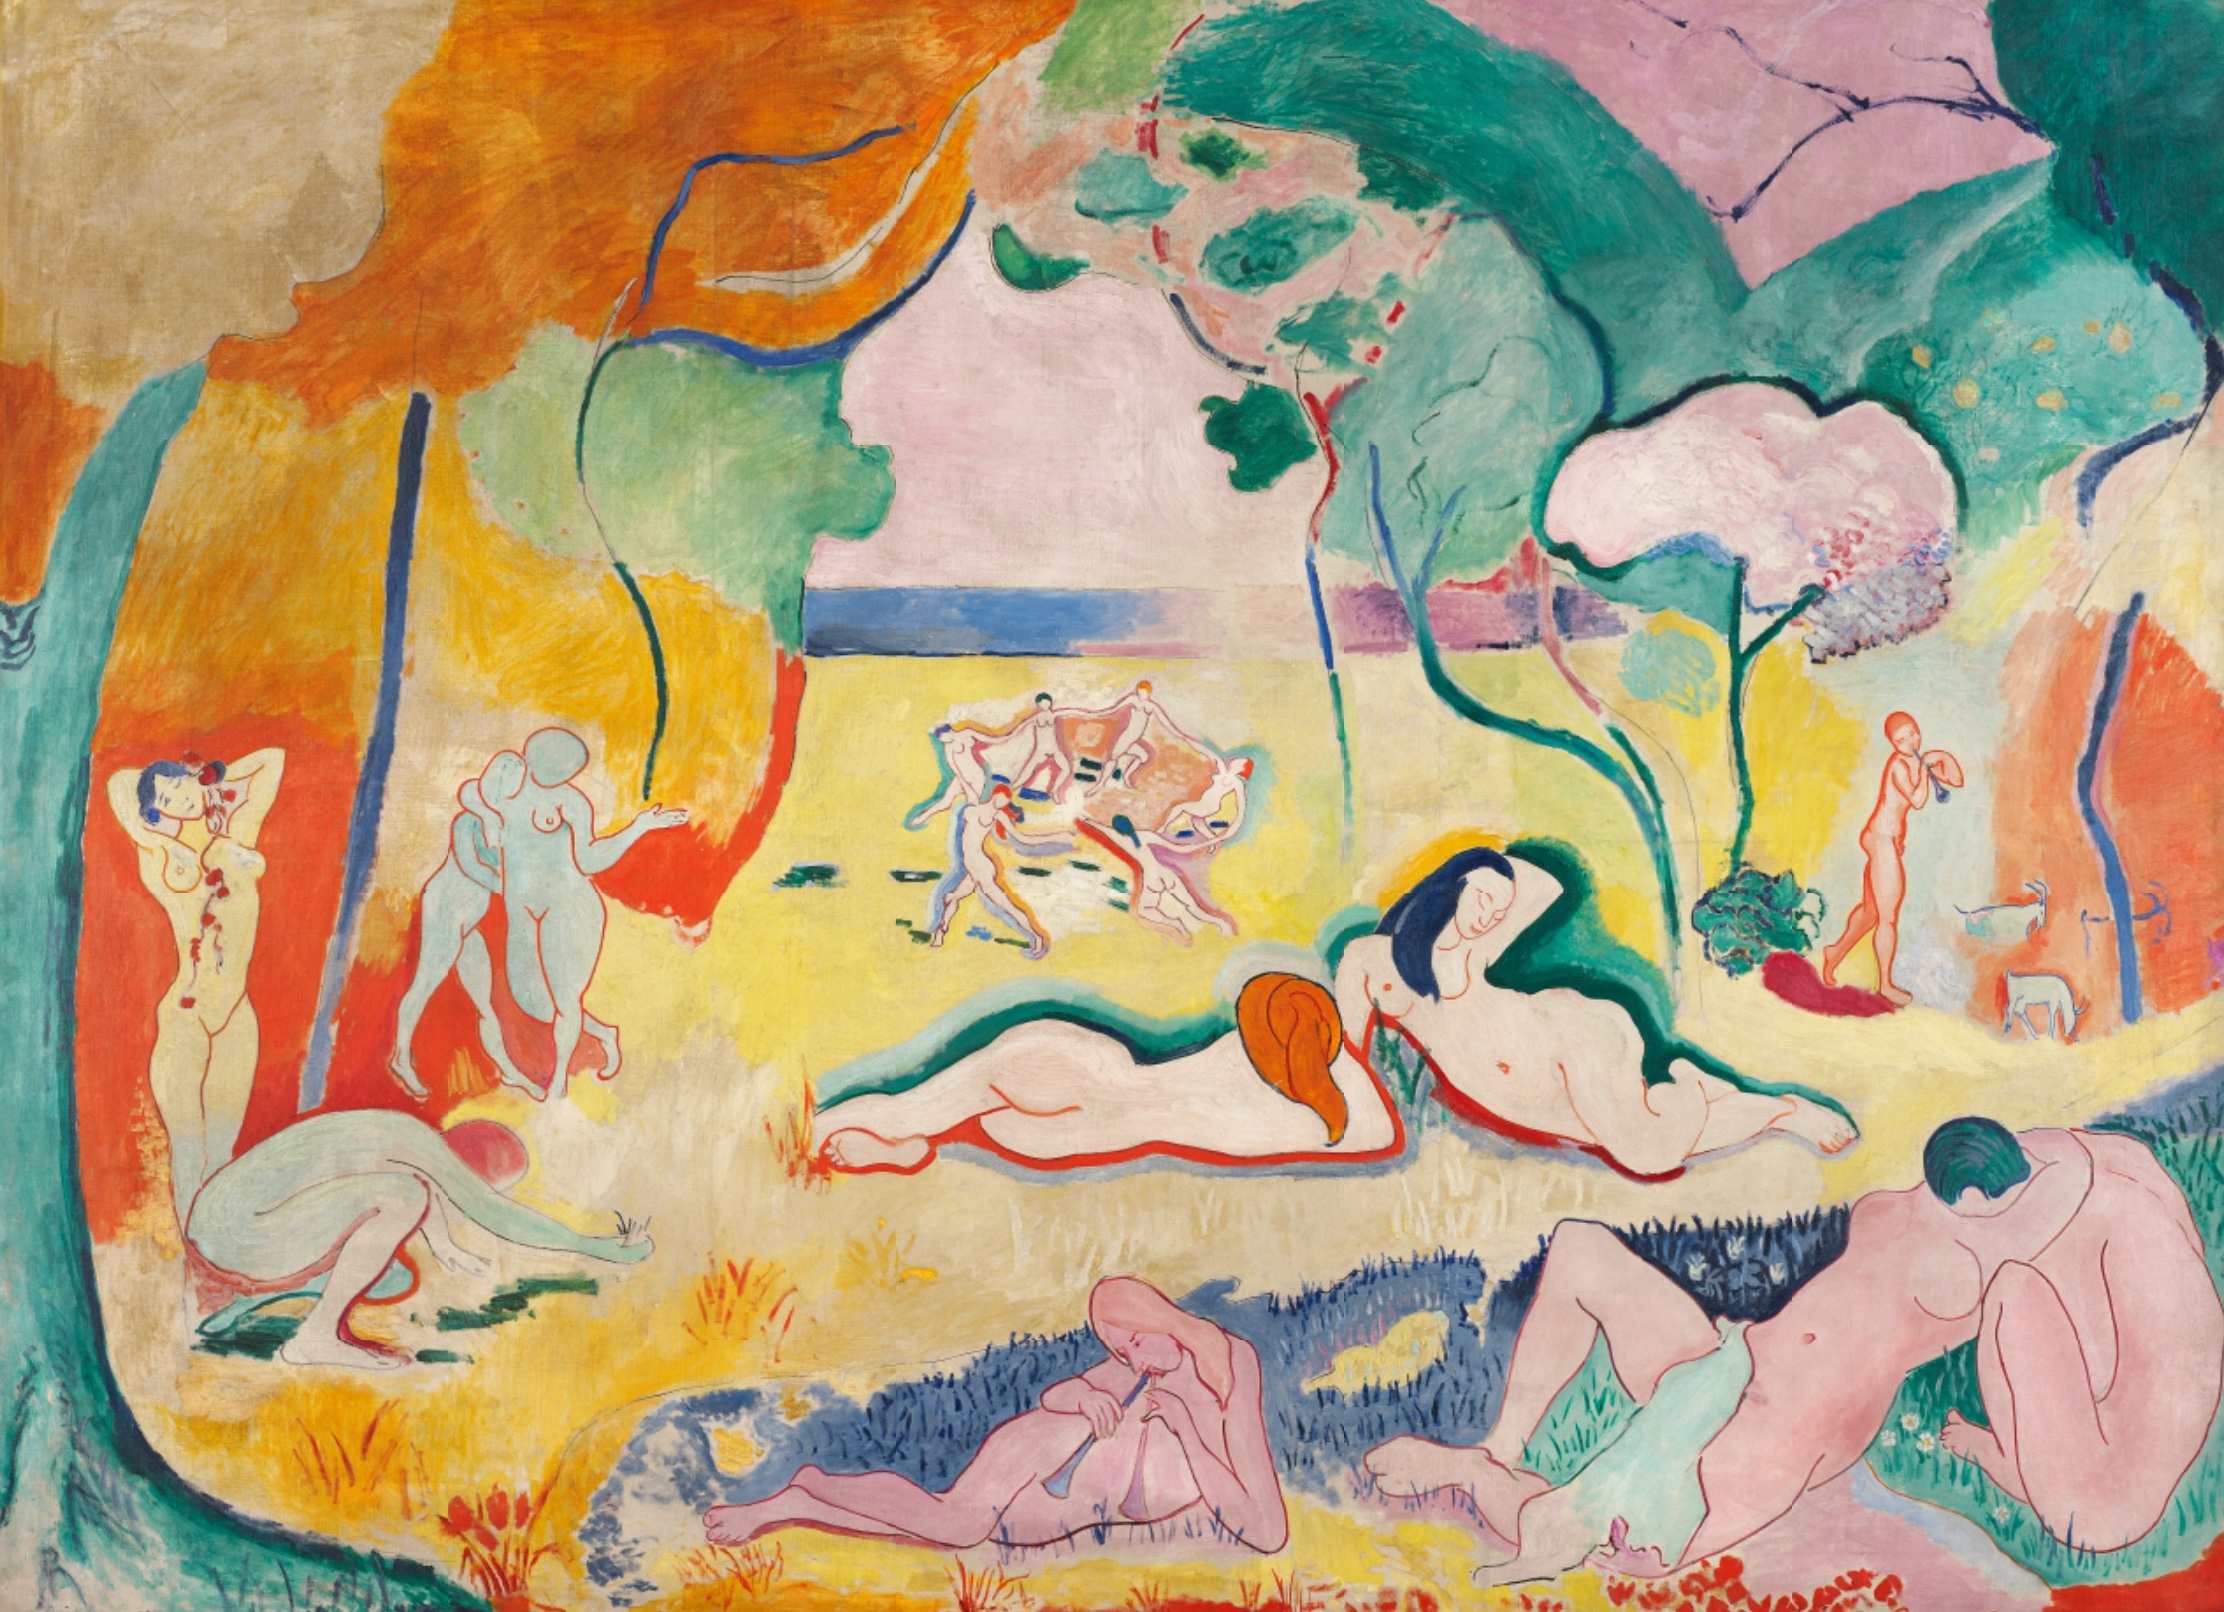 A beginner's guide to Fauvism (article)